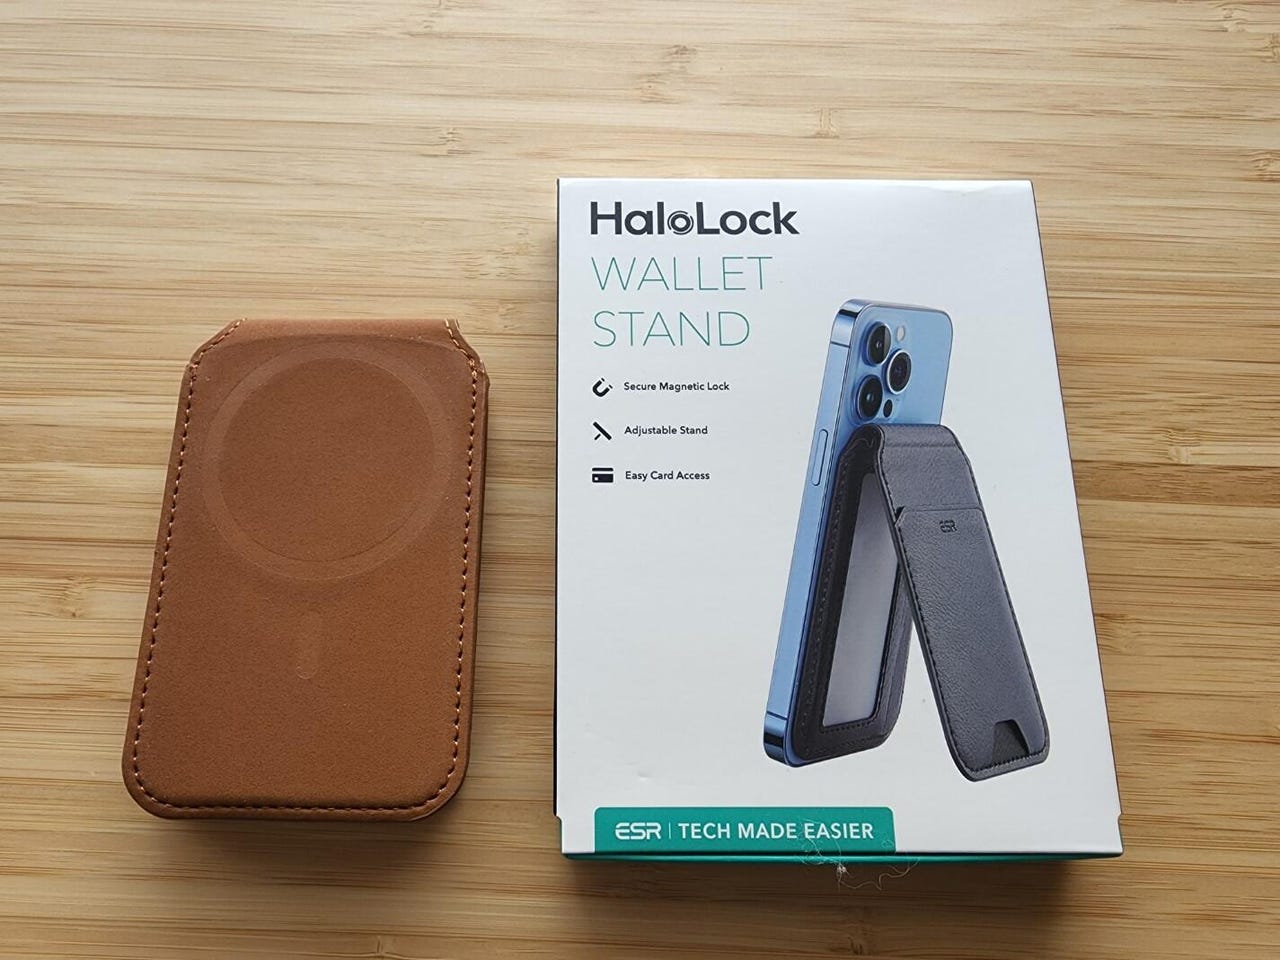 ESR HaloLock Wallet Stand hands-on: Multi-card wallet and